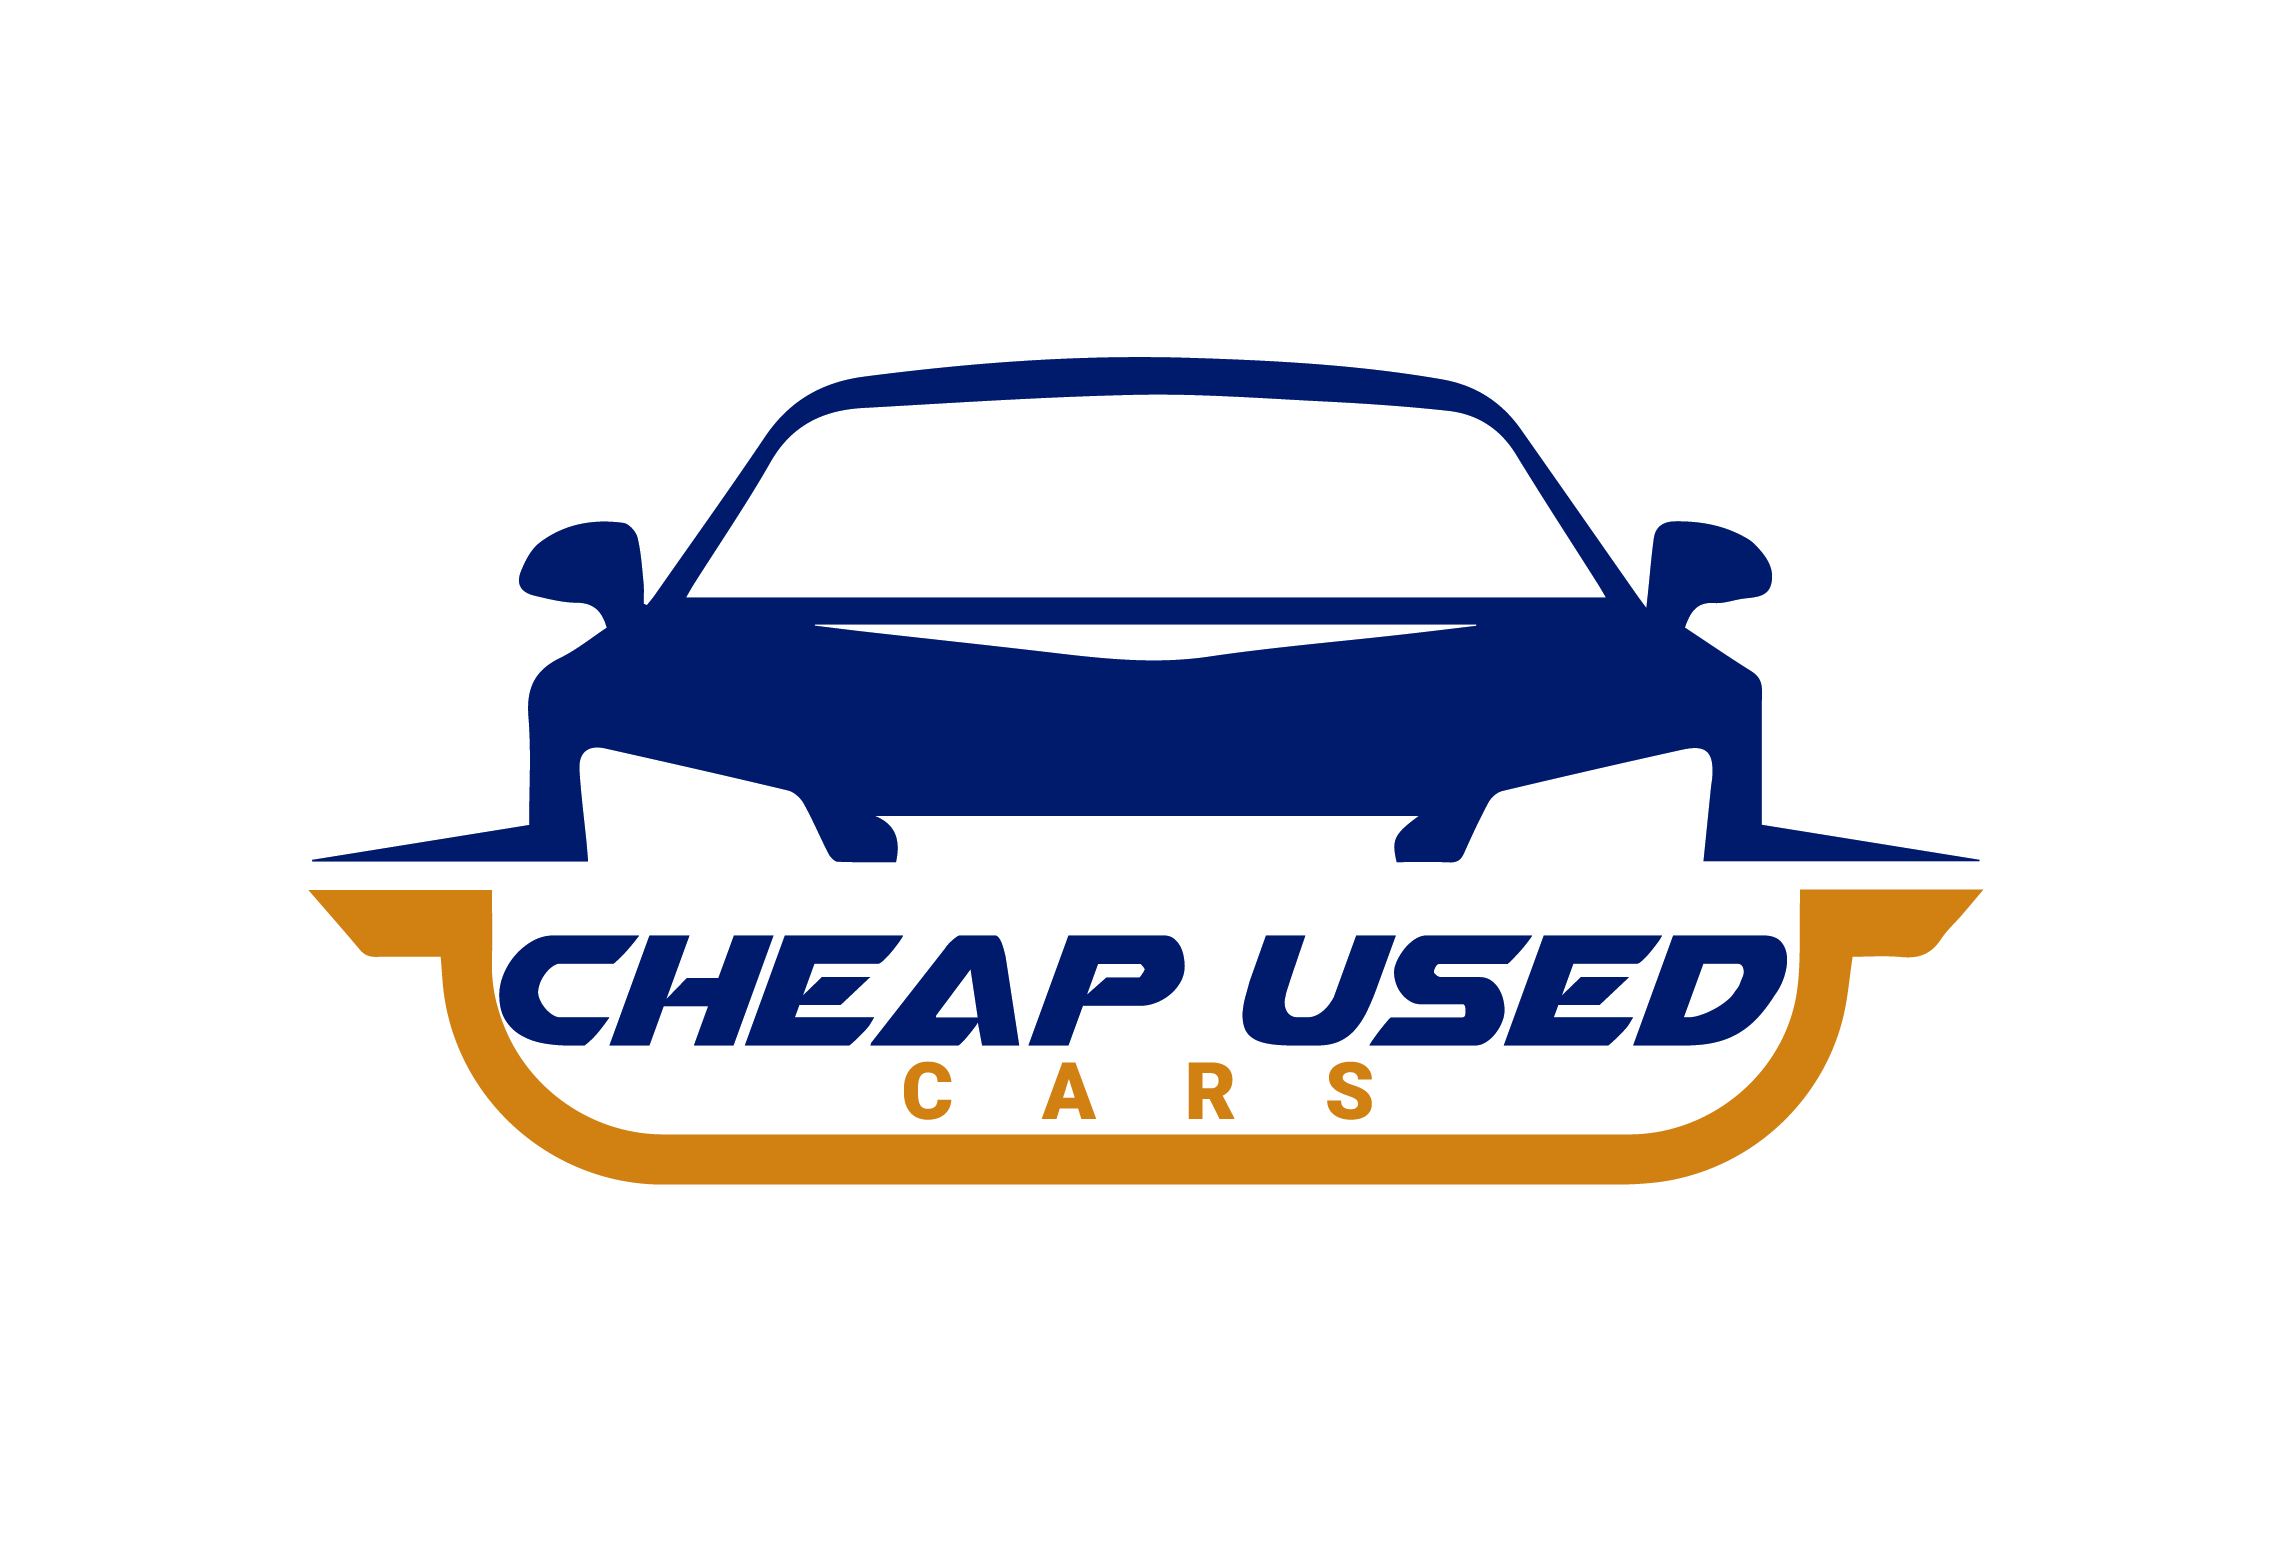 Cheap Used Cars | Used Cars for Sale | Pre Owned Vehicles